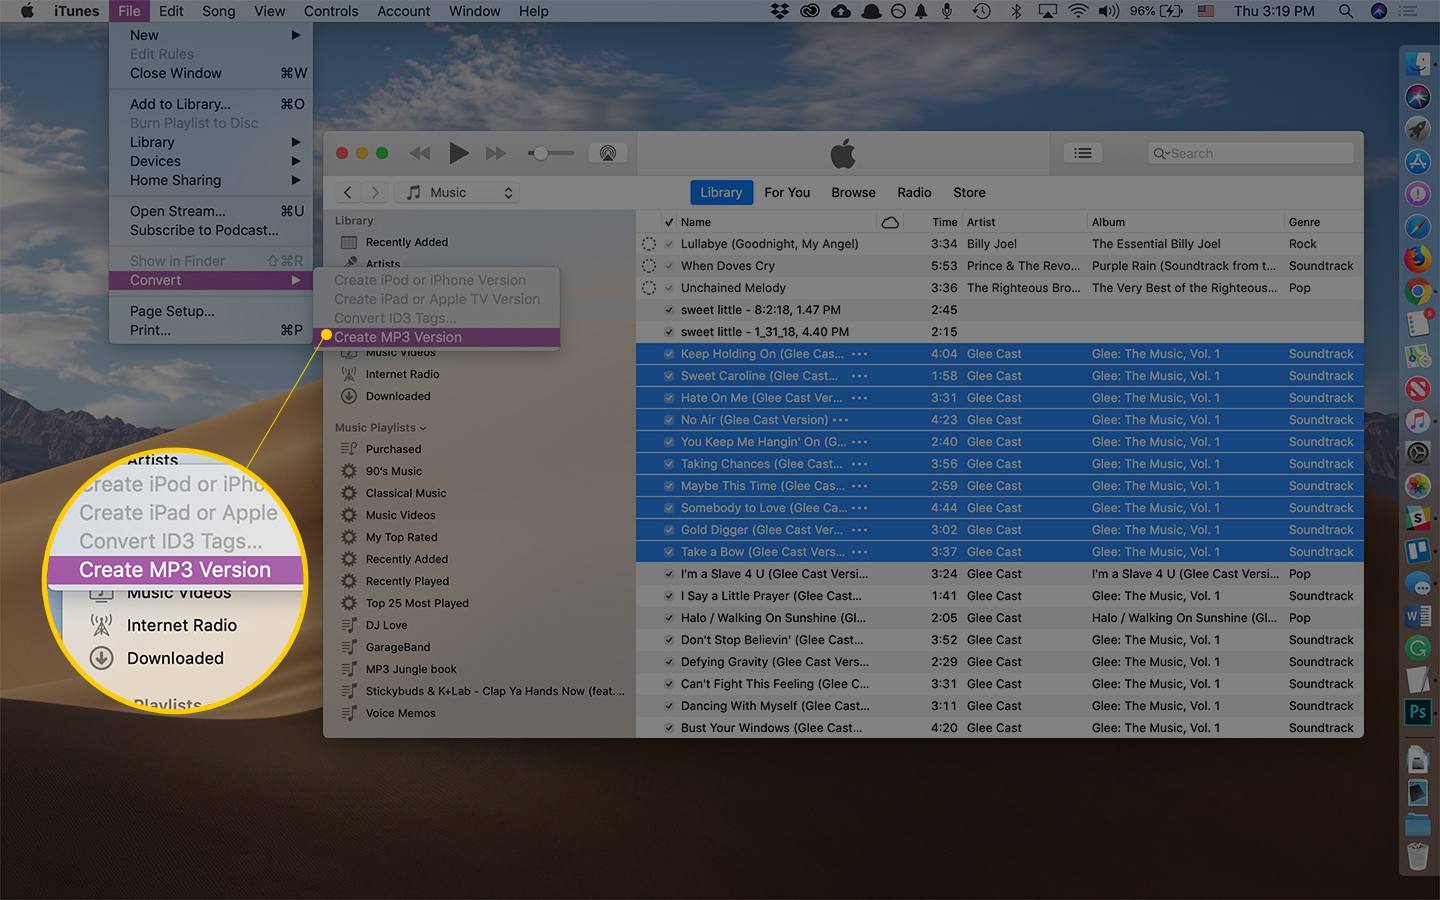 mp4 to mp3 converter for apple mac